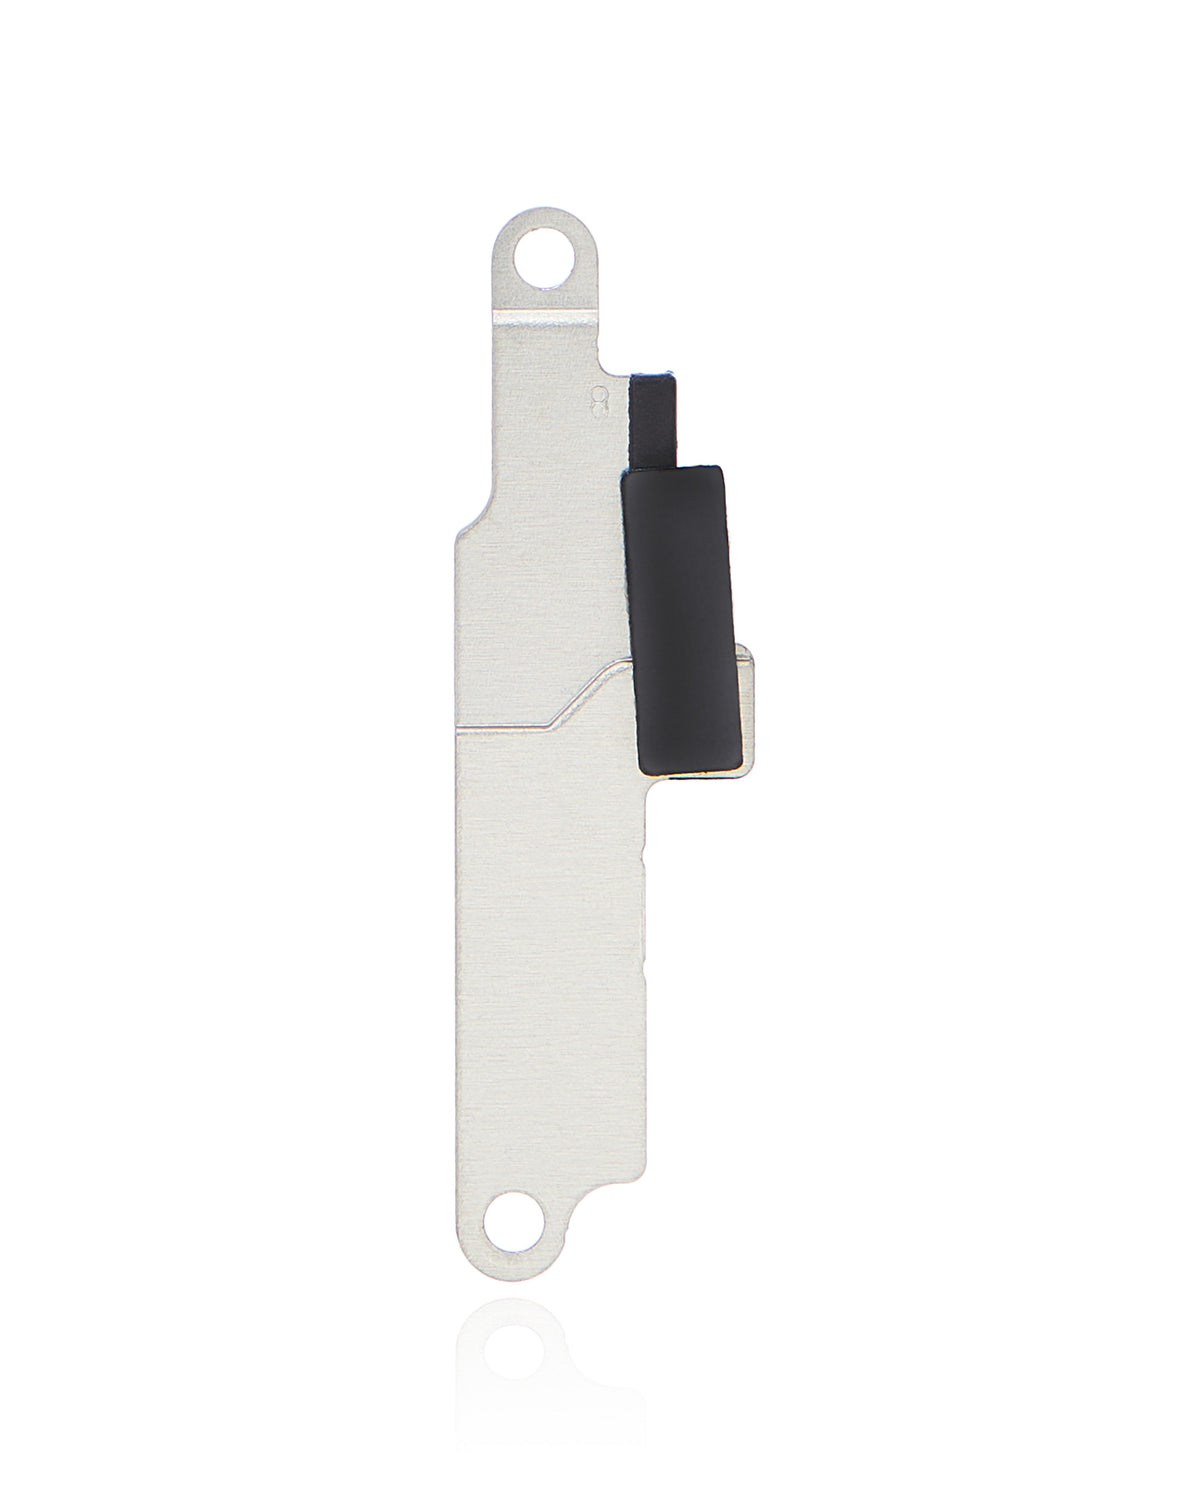 LCD FLEX CABLE HOLDING BRACKET COMPATIBLE WITH IPHONE 7